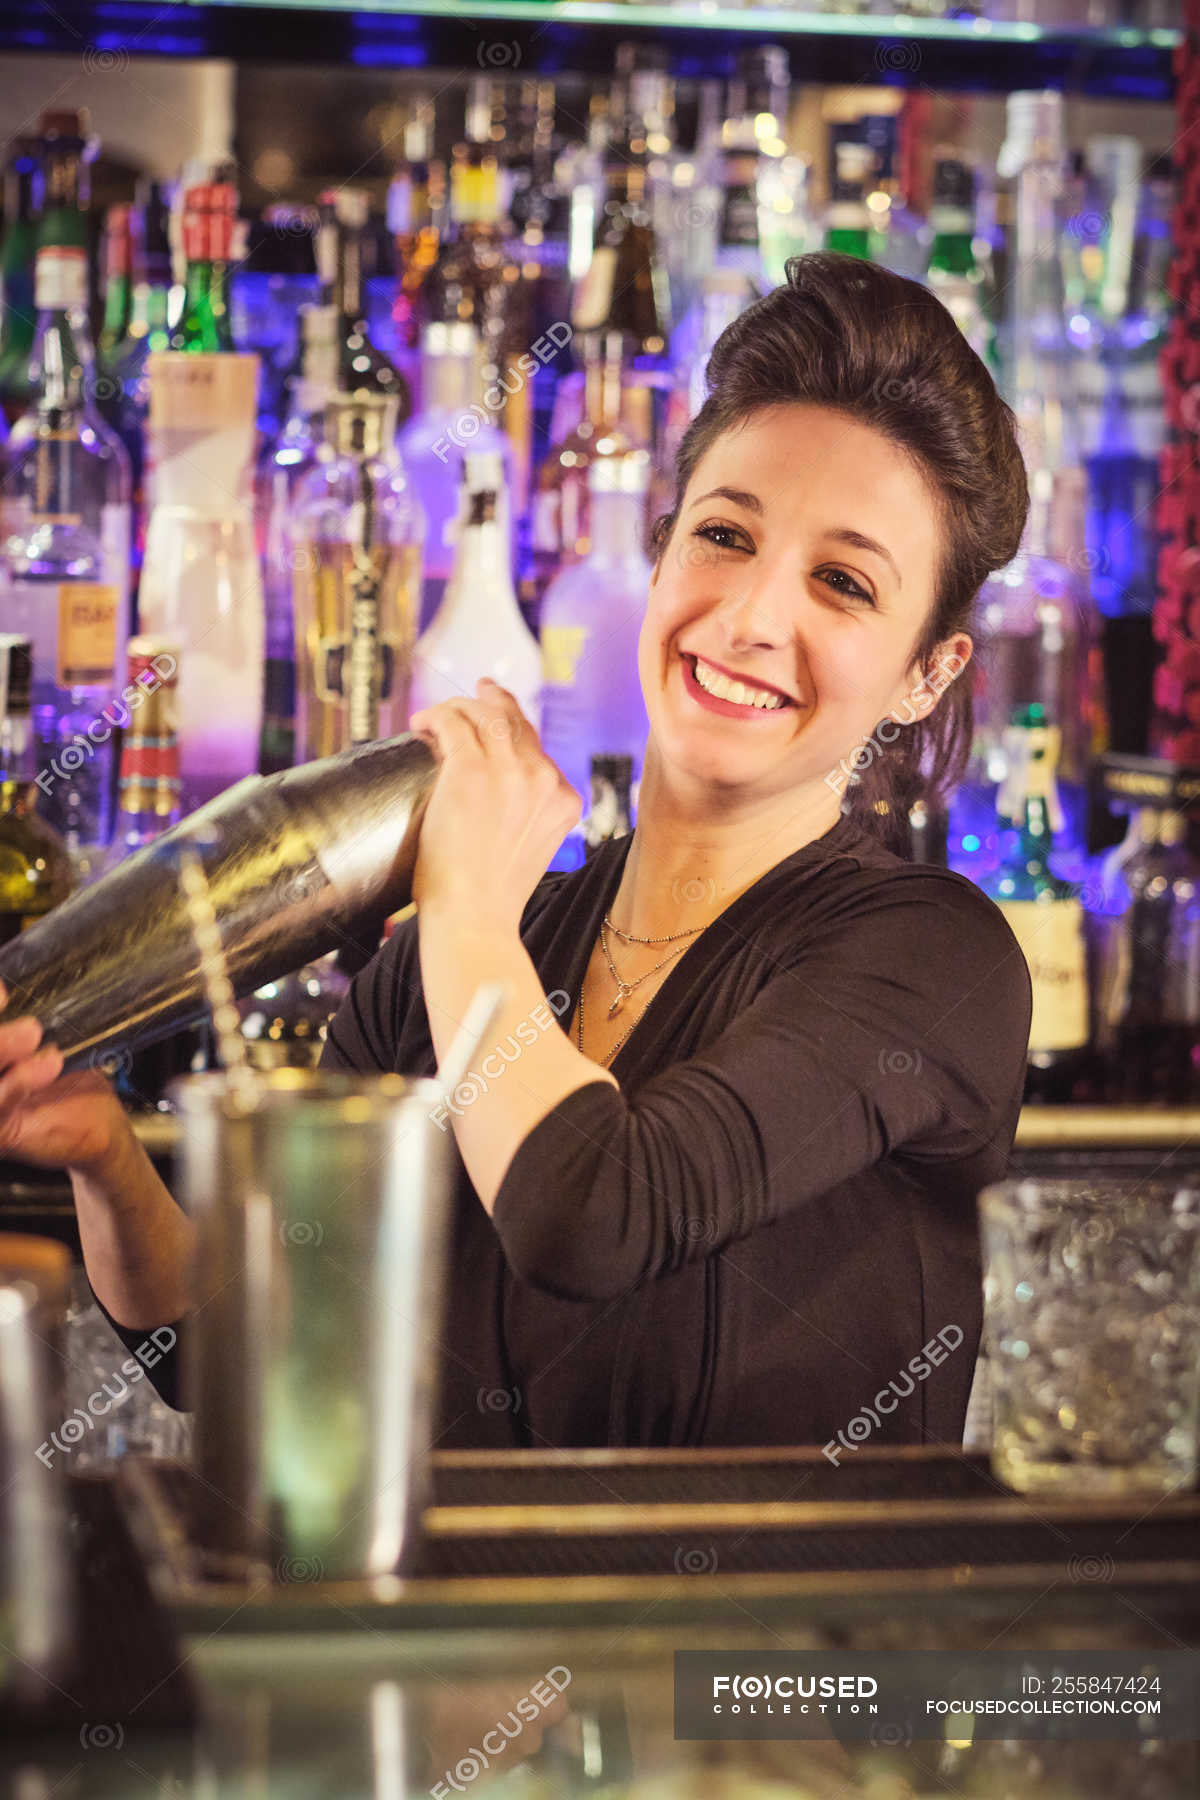 To bartender? a best the to whats female talk way How to